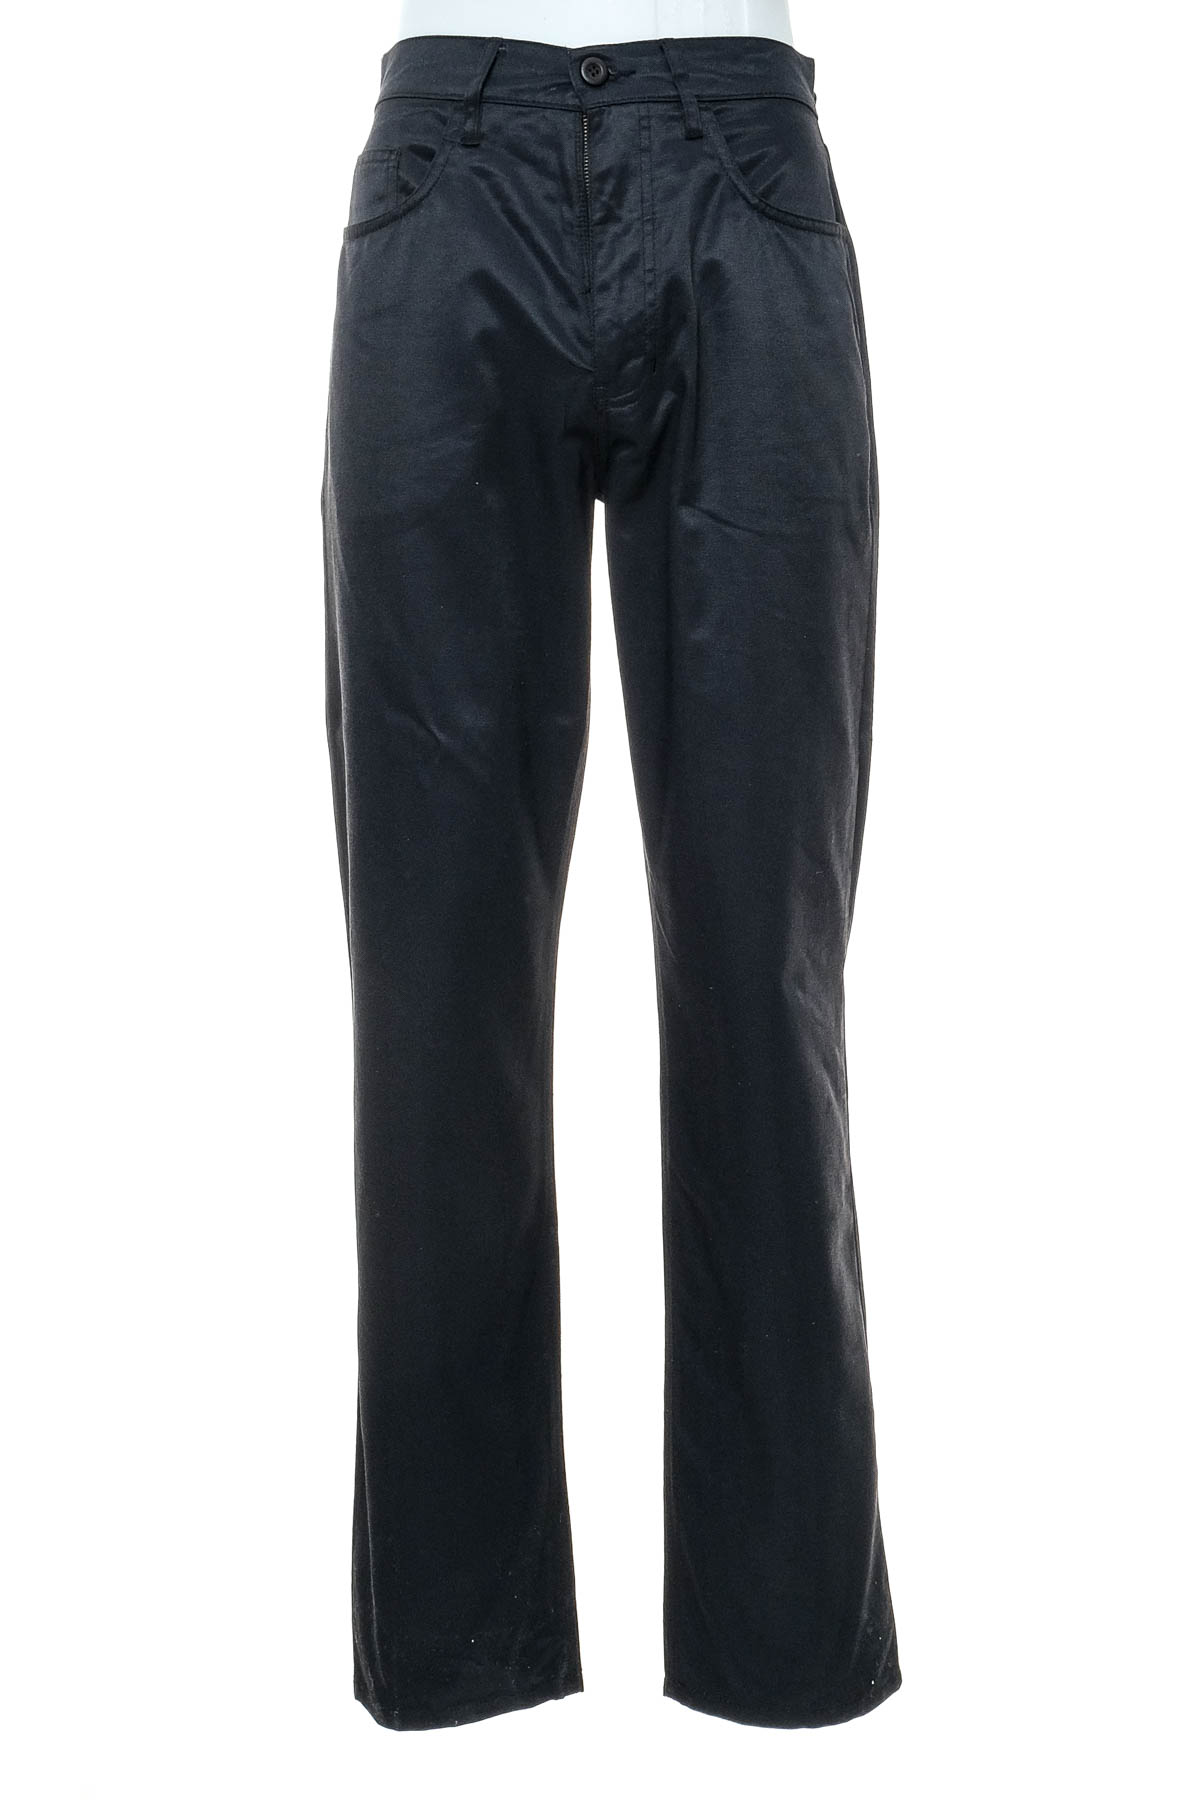 Men's trousers - Jeanagers - 0